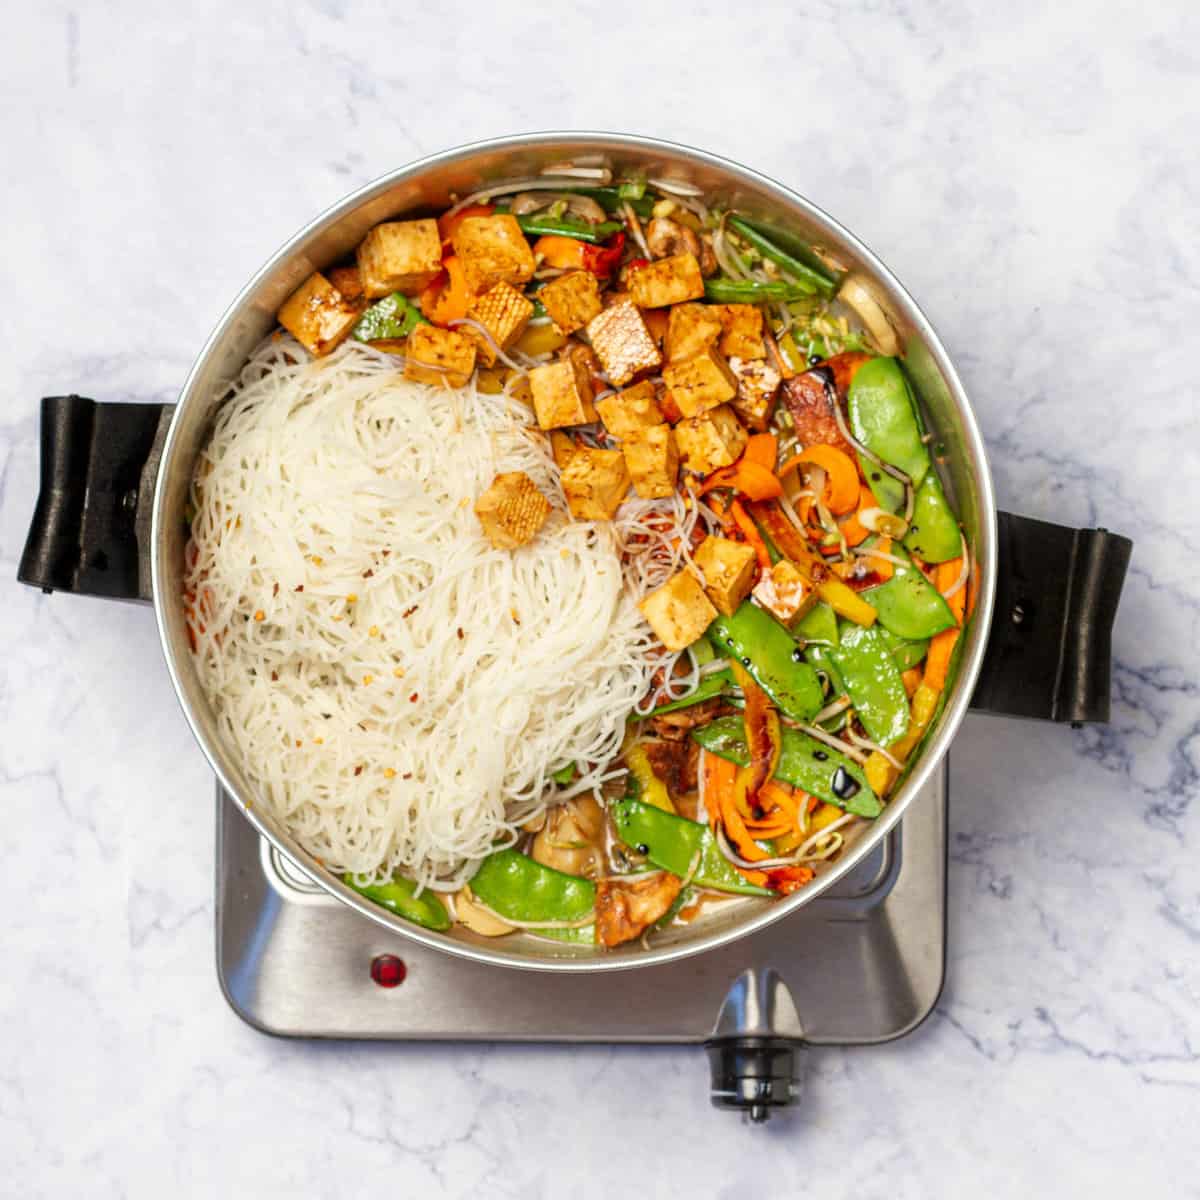 Combine vegetables with tofu, chicken and rice noodles in a skillet